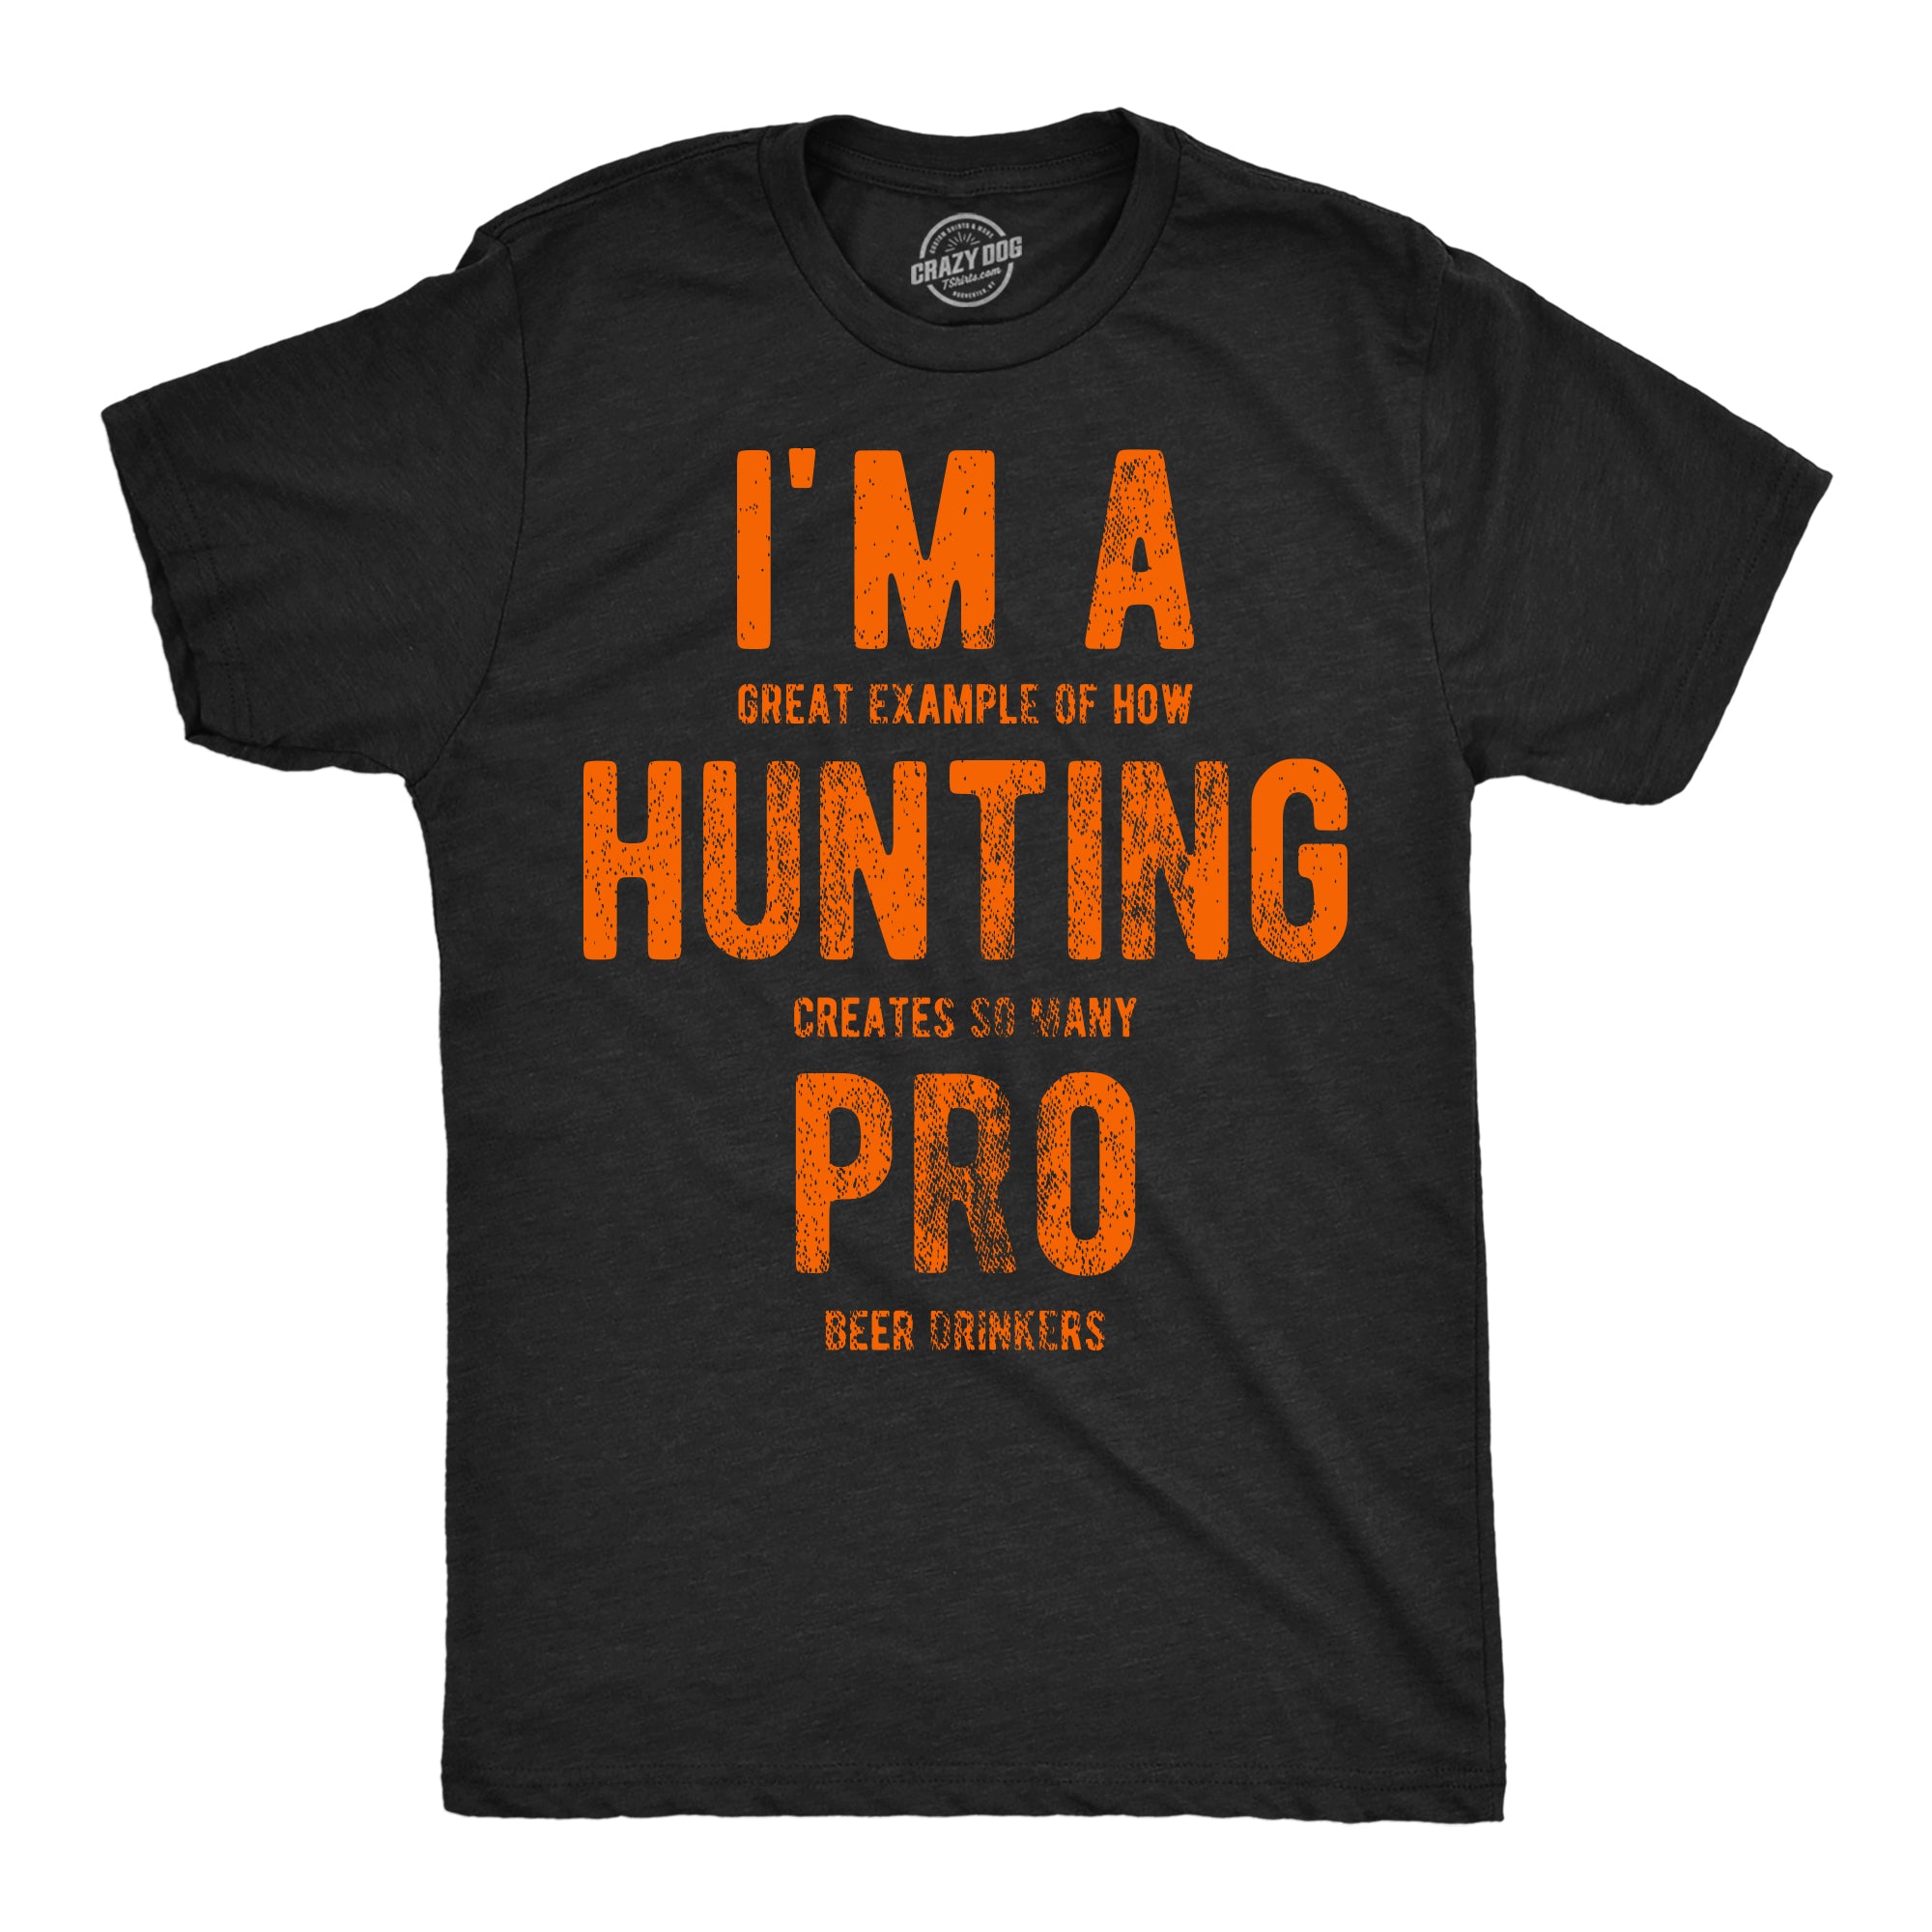 Funny Heather Black - Hunting Pro Beer Drinkers Im A Great Exampe Of How Hunting Creates So Many Pro Beer Drinkers Mens T Shirt Nerdy Hunting Beer sarcastic Tee